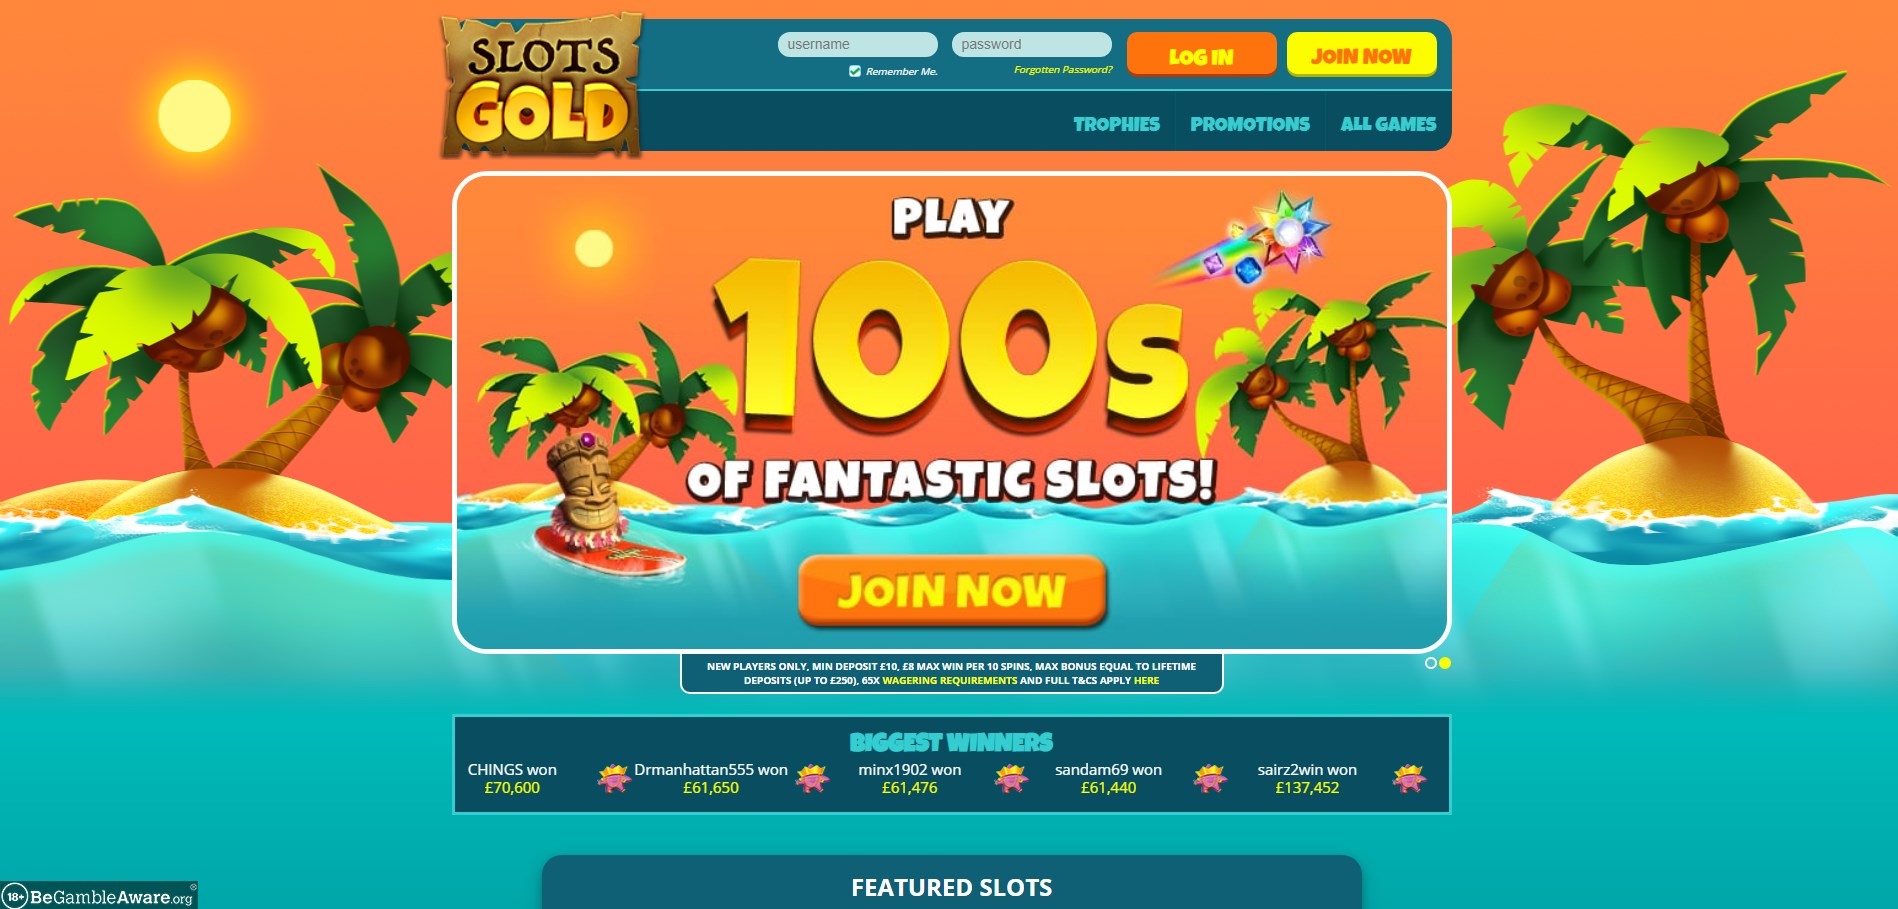 Slots Gold Casino Review